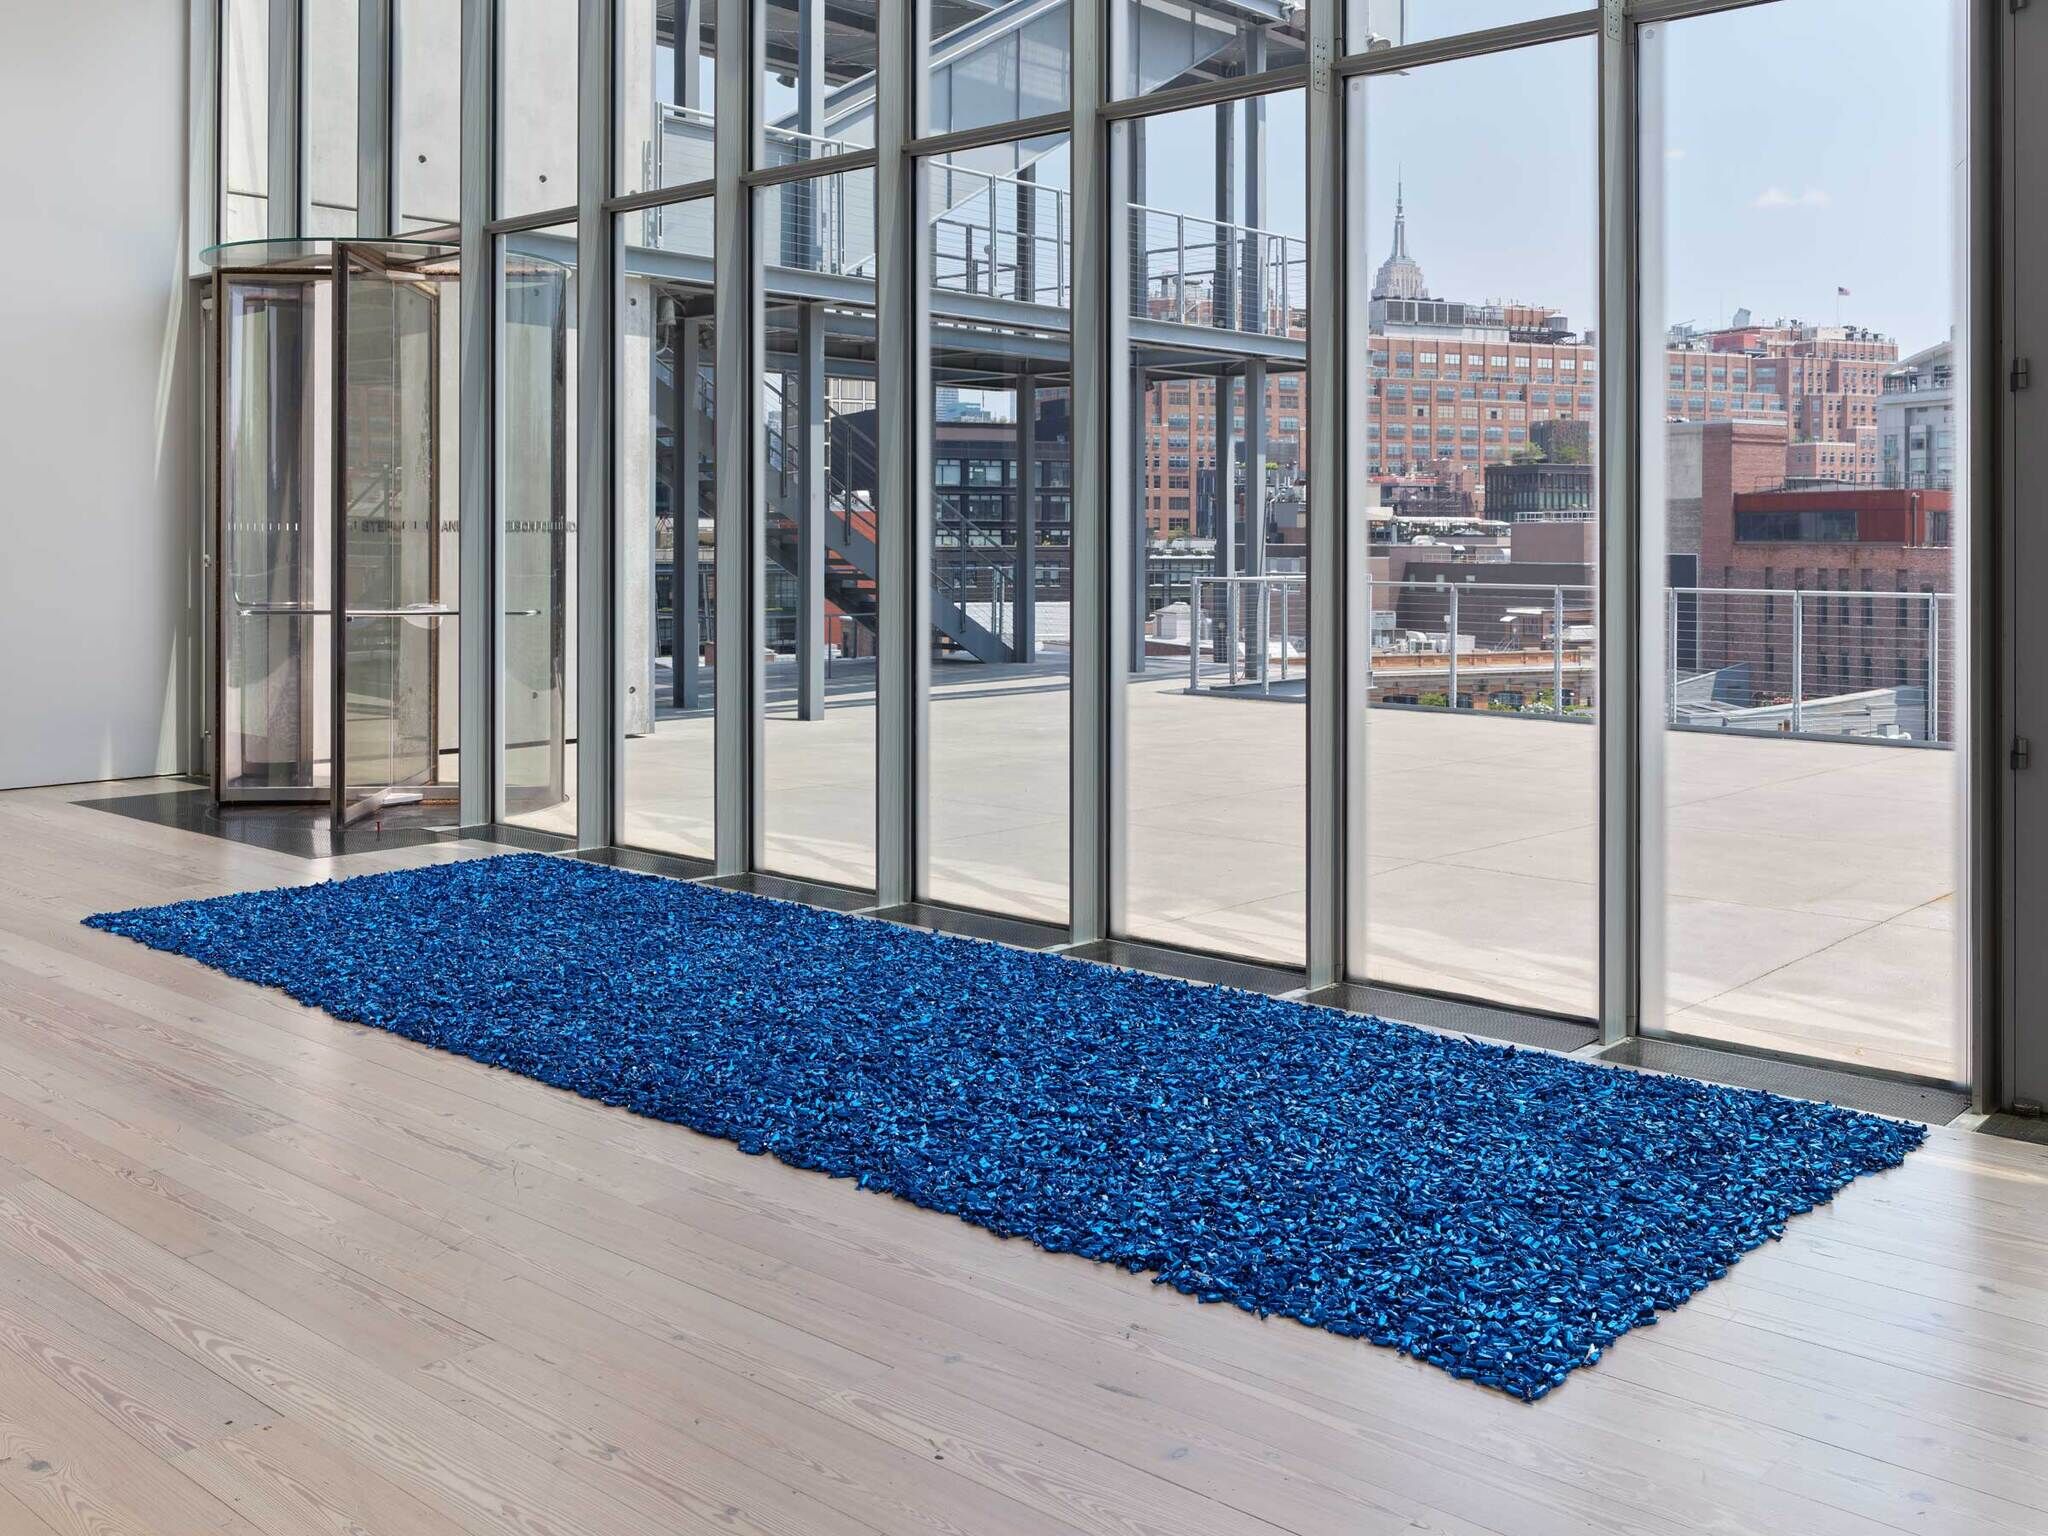 A huge pile of small blue wrapped candy on the ground in front of big floor to ceiling windows showing a balcony and the New York skyline.